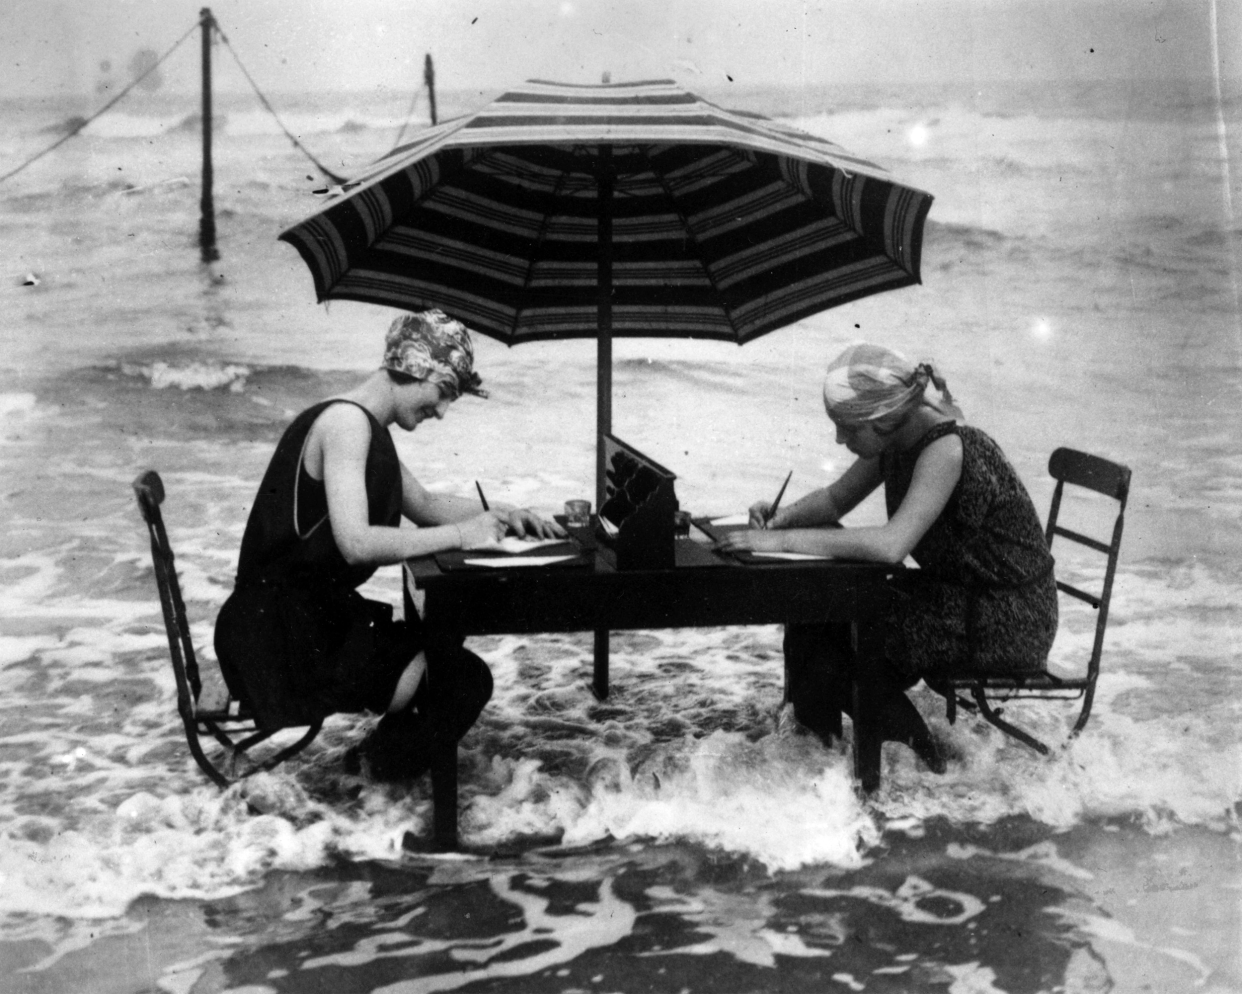 Two women brave the lapping waves at their feet as they continue with their correspondence at the water's edge